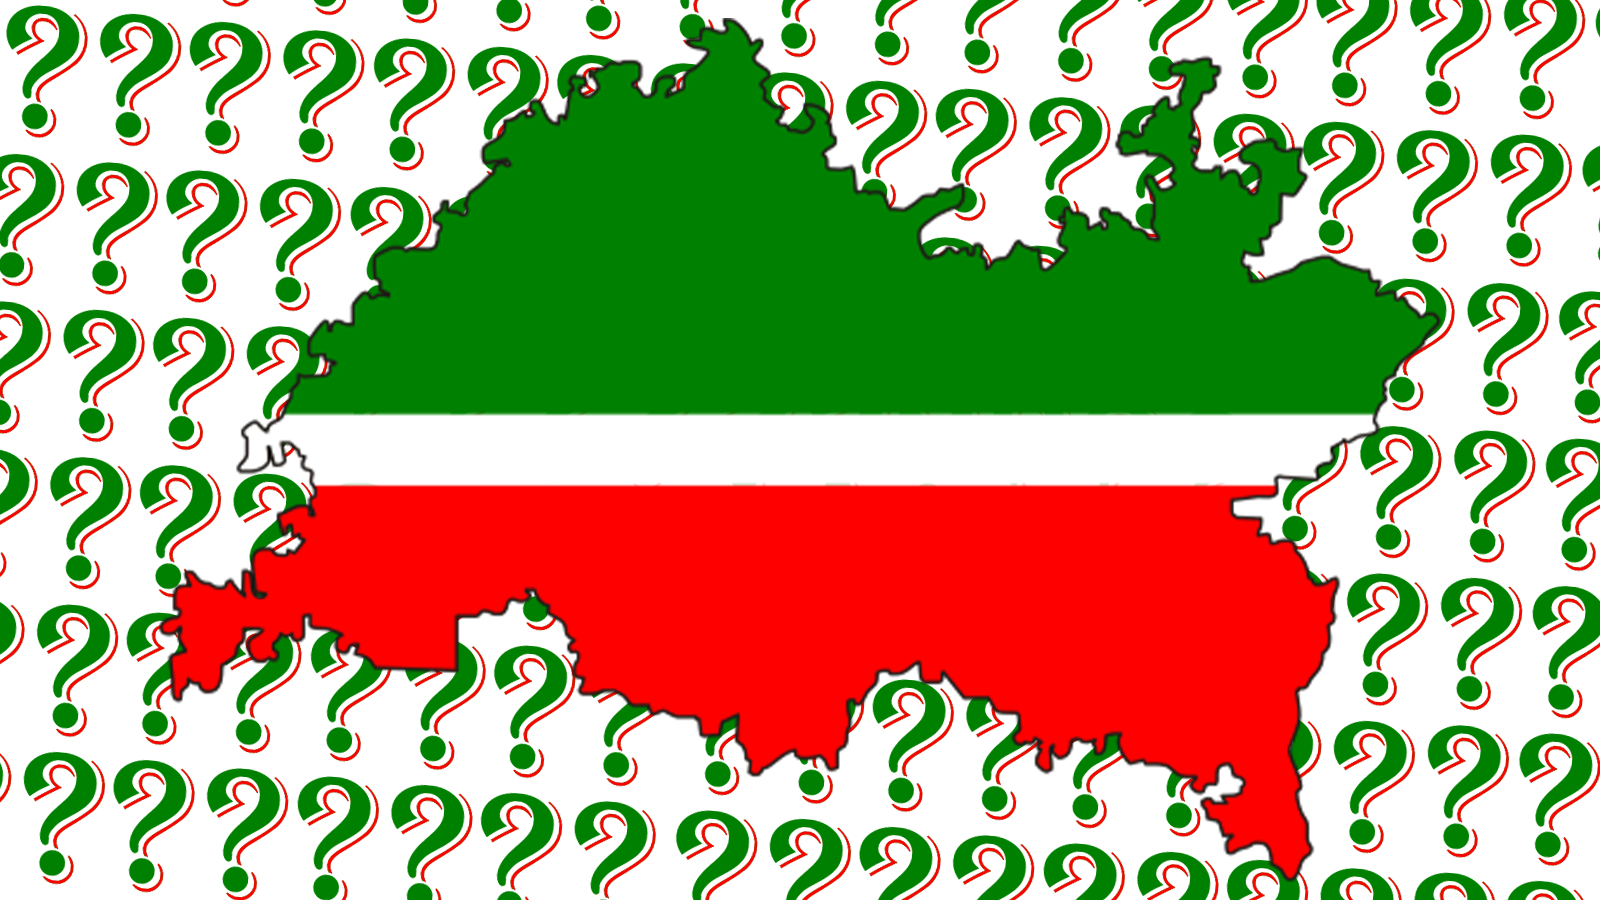 Tatarstan’s historical chances – what to do now, given the lessons of the past?